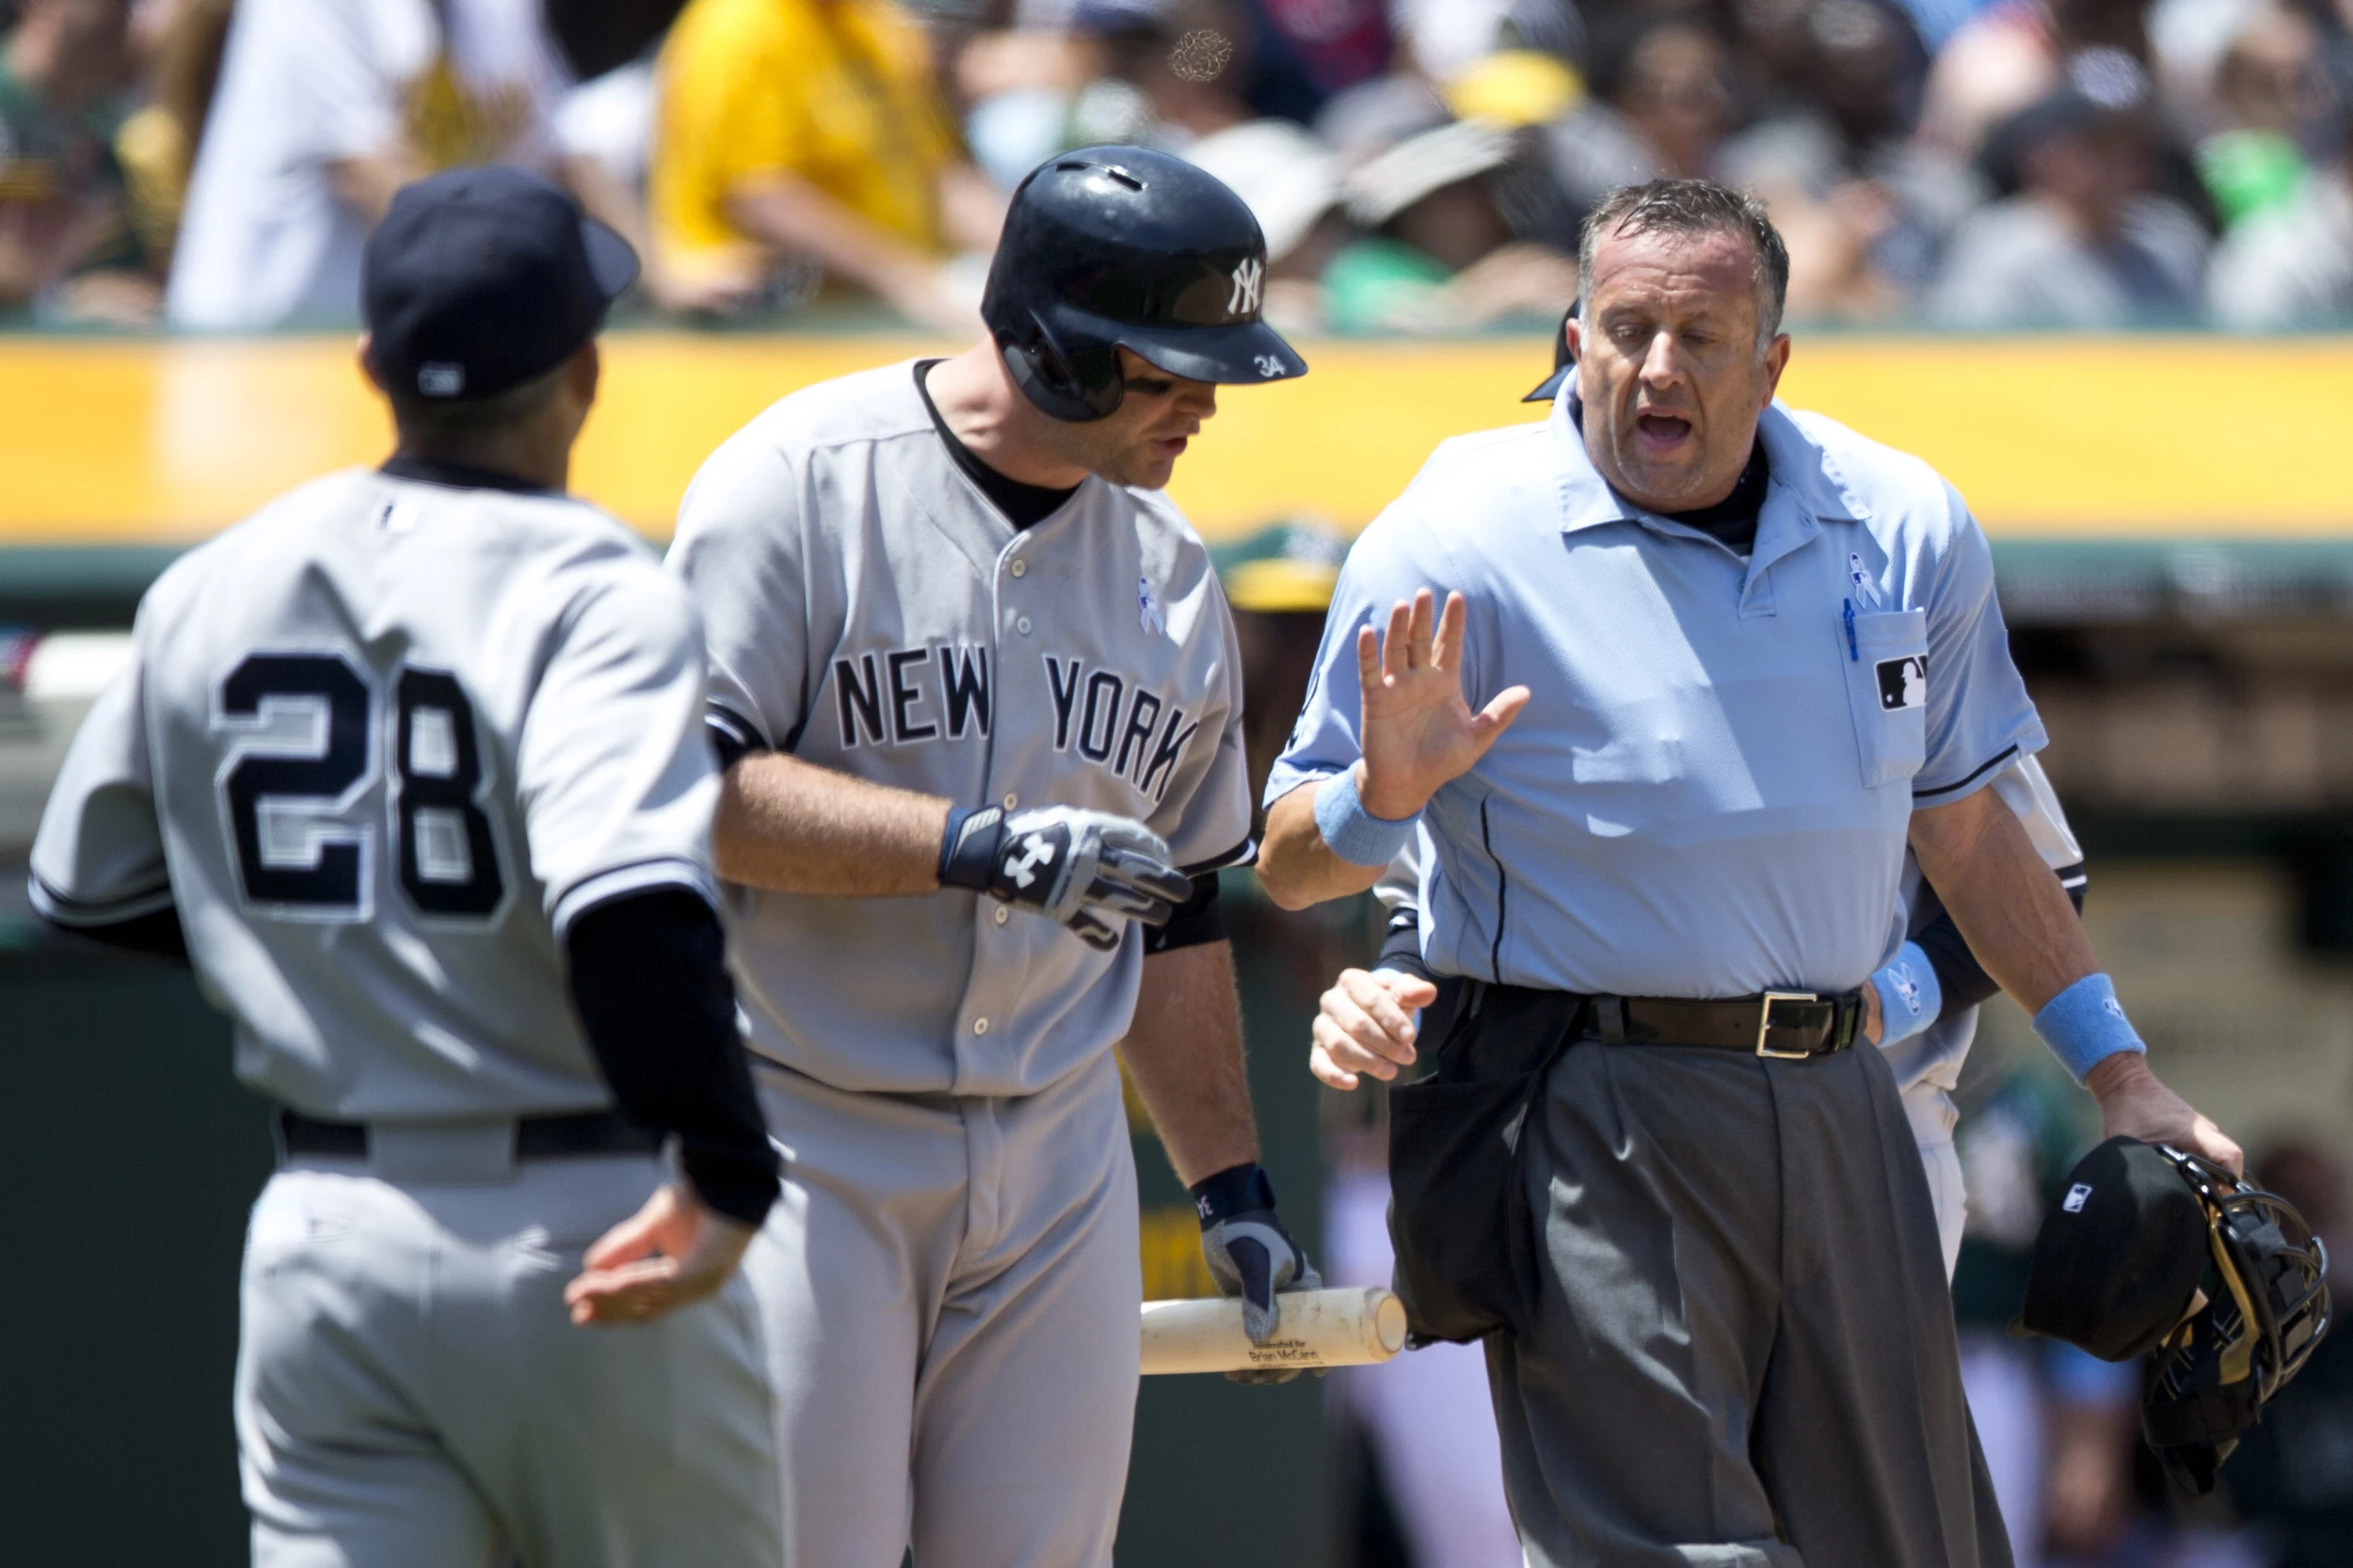 Dale, we know you're gay.' How a Major League Baseball umpire came